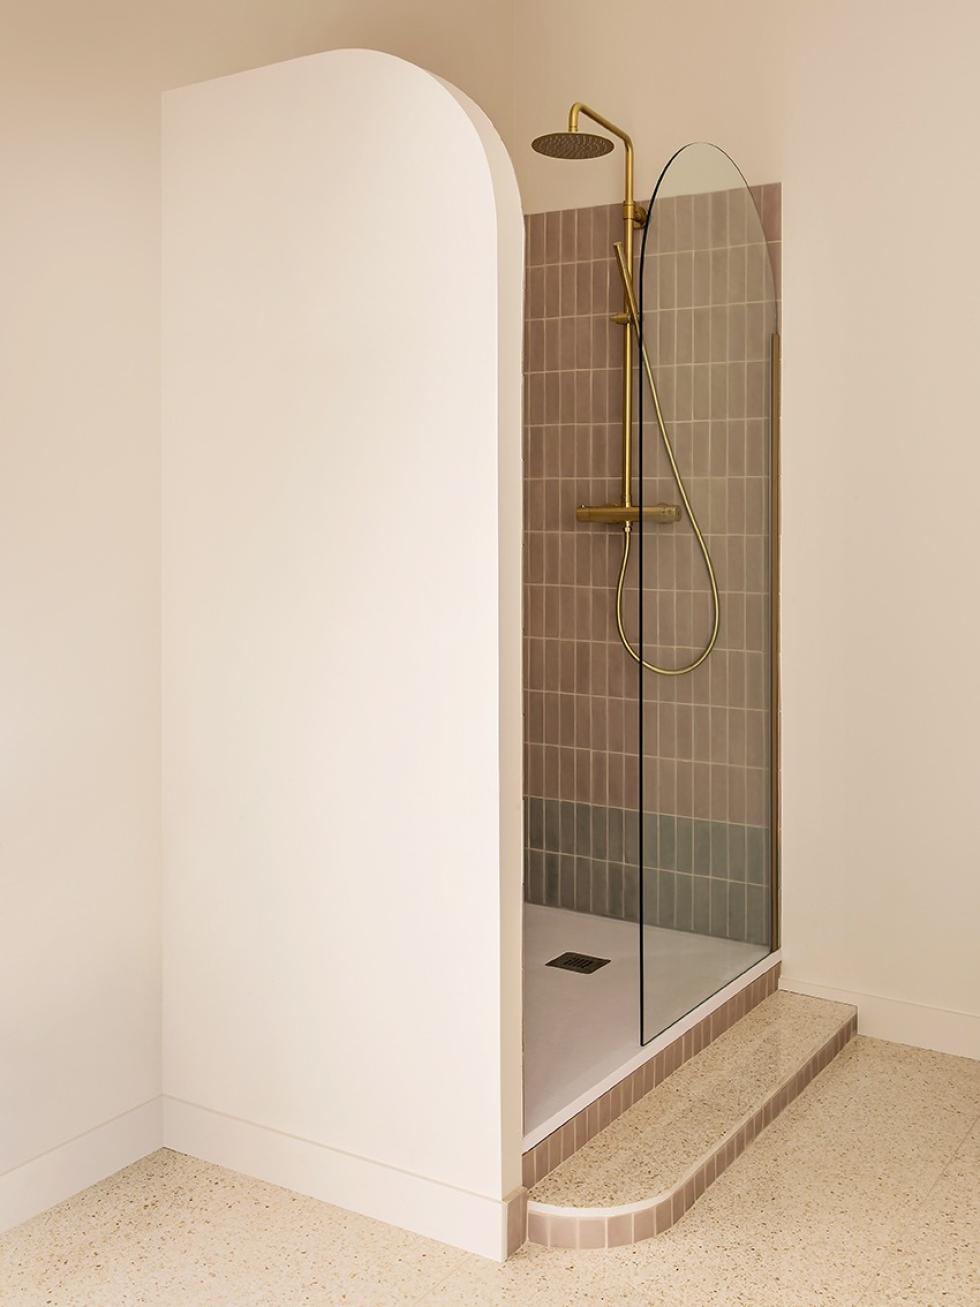 Shower stall with brass taps and rounded details